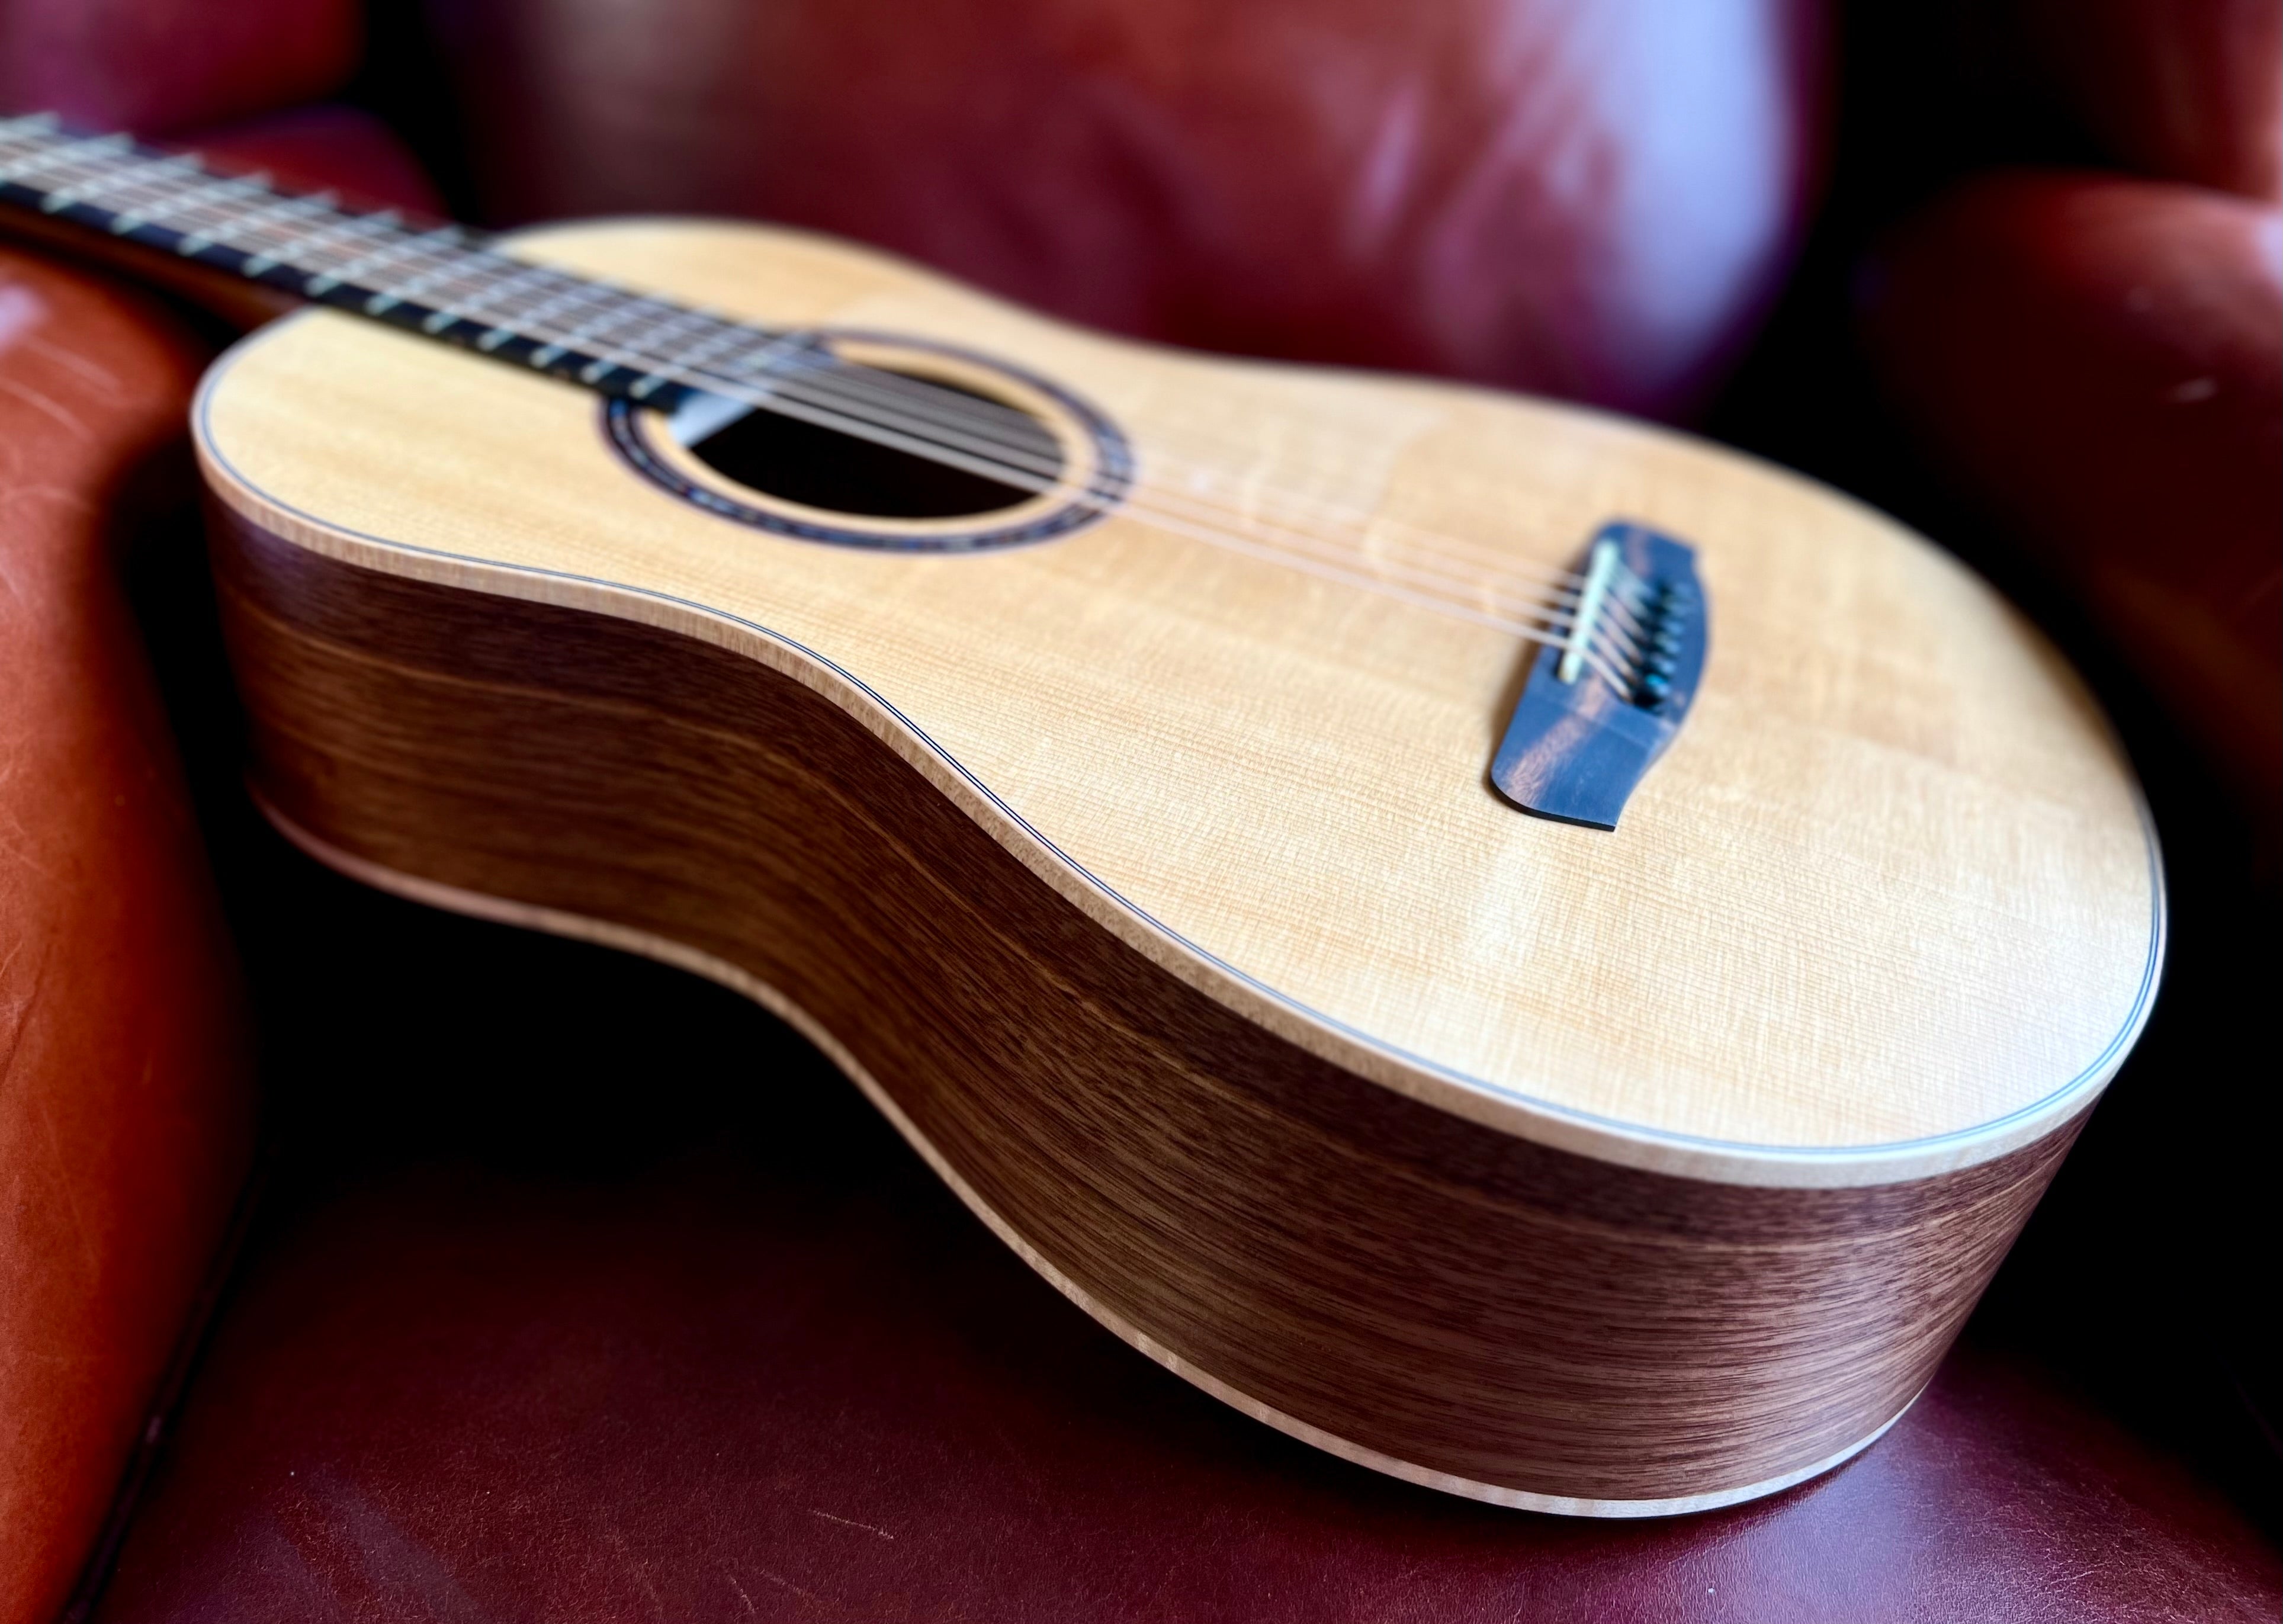 Dowina Walnut BV Deluxe Torrified Swiss Moon Spruce W' Semi Gloss Finish, Acoustic Guitar for sale at Richards Guitars.